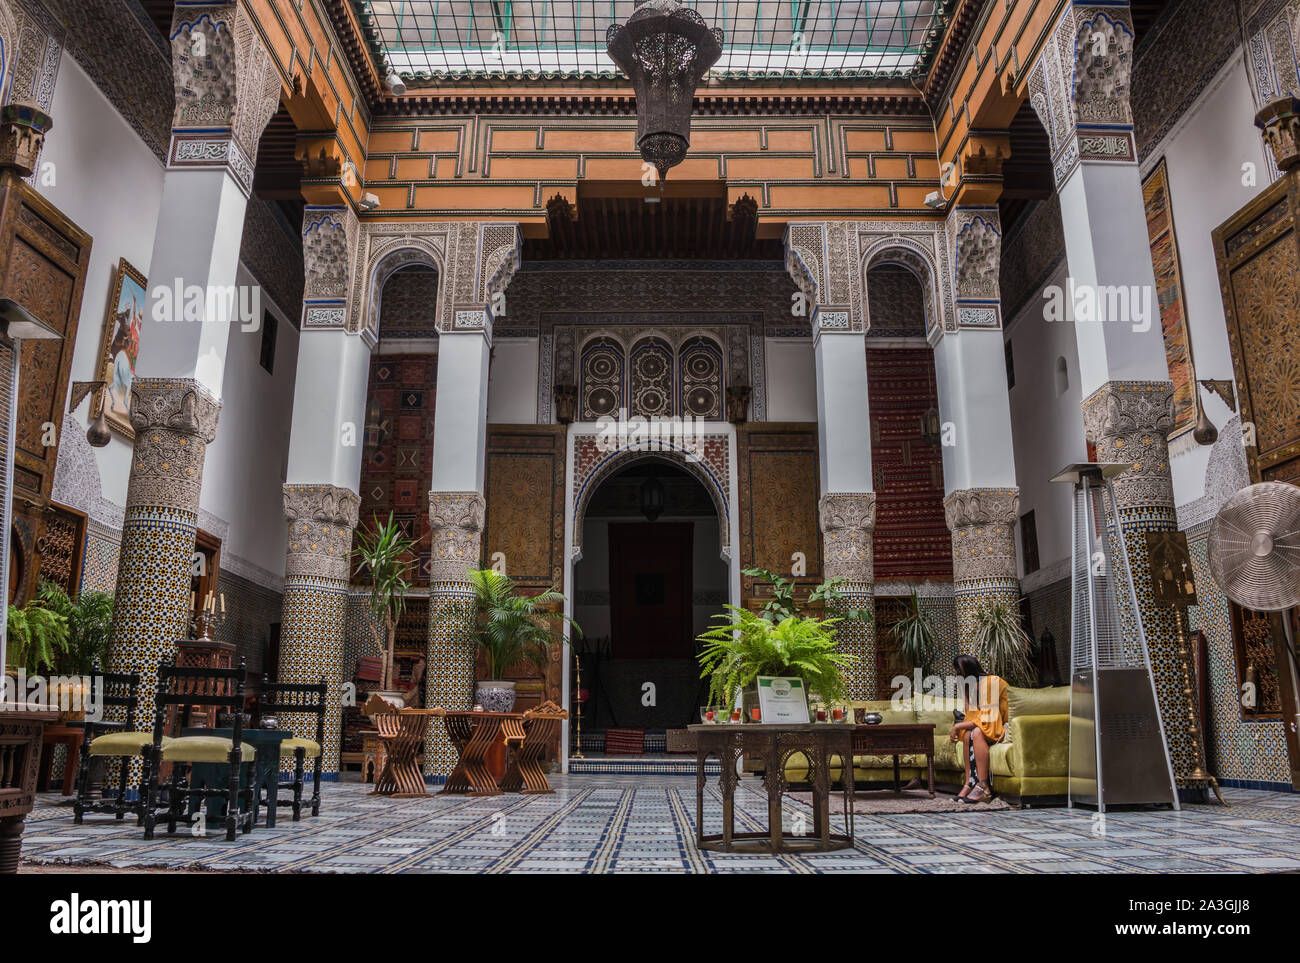 A picture of the interior of the Palais de Fes Dar Tazi. Stock Photo